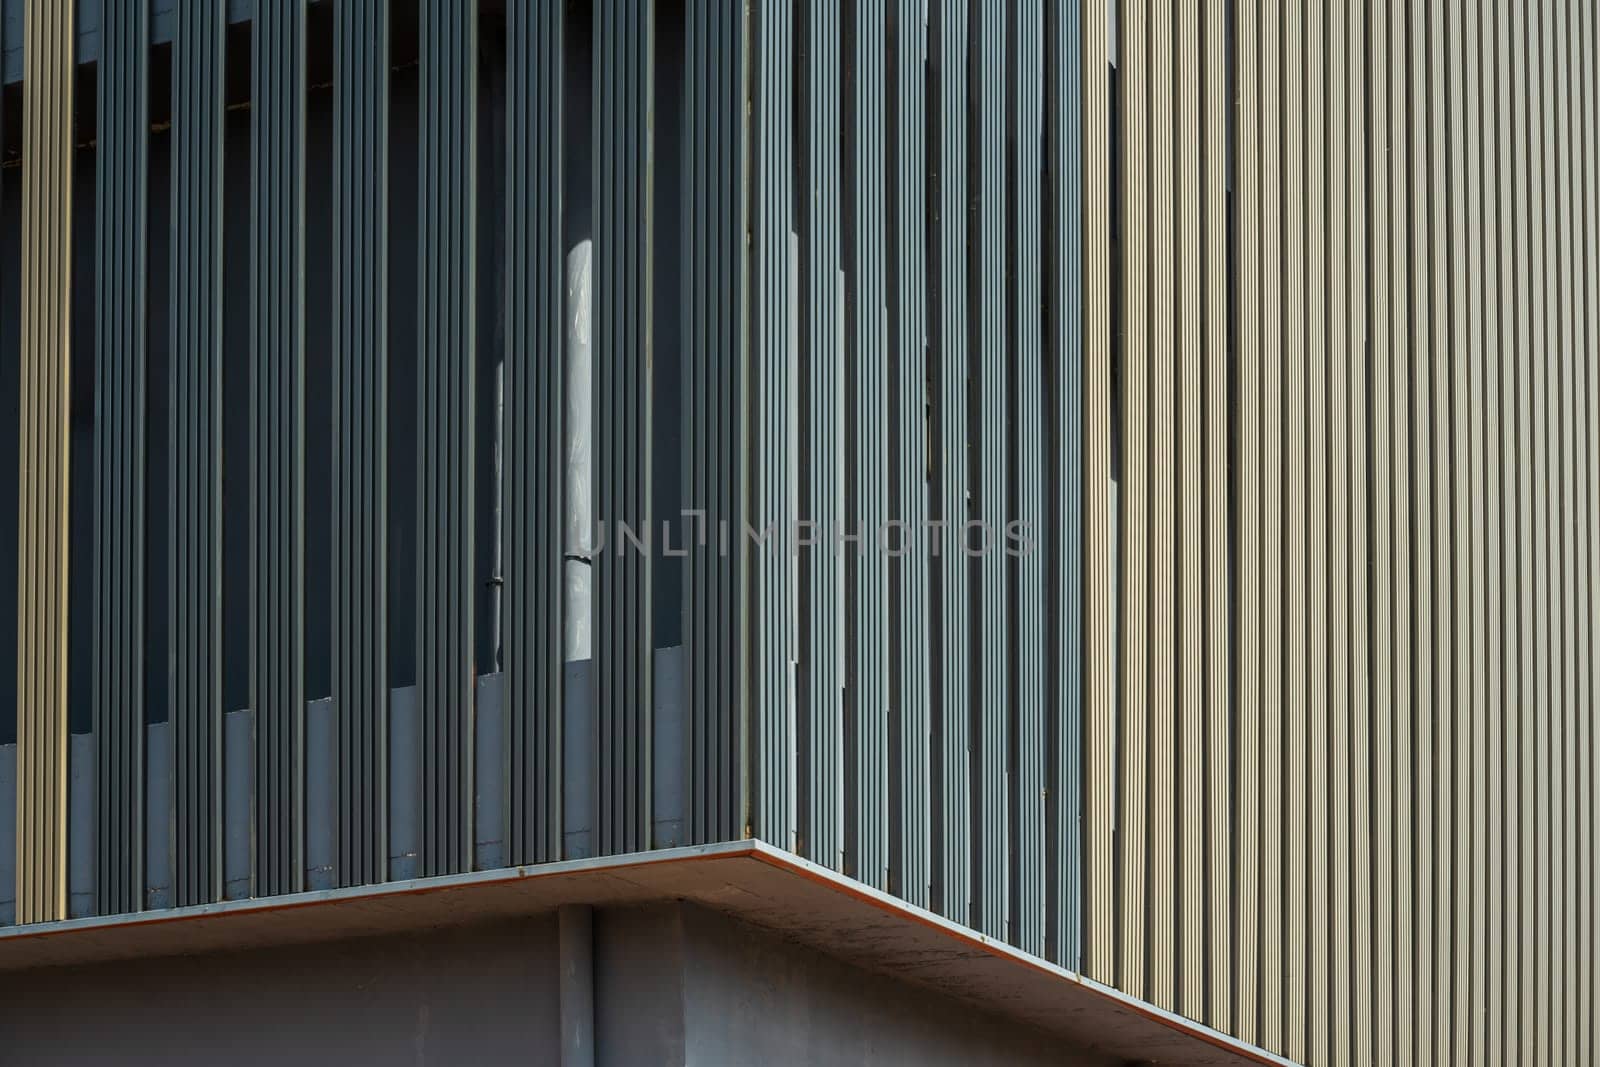 Anthracite gray and sand gray vinyl coated exterior insulation board on PVC panel by Sonat